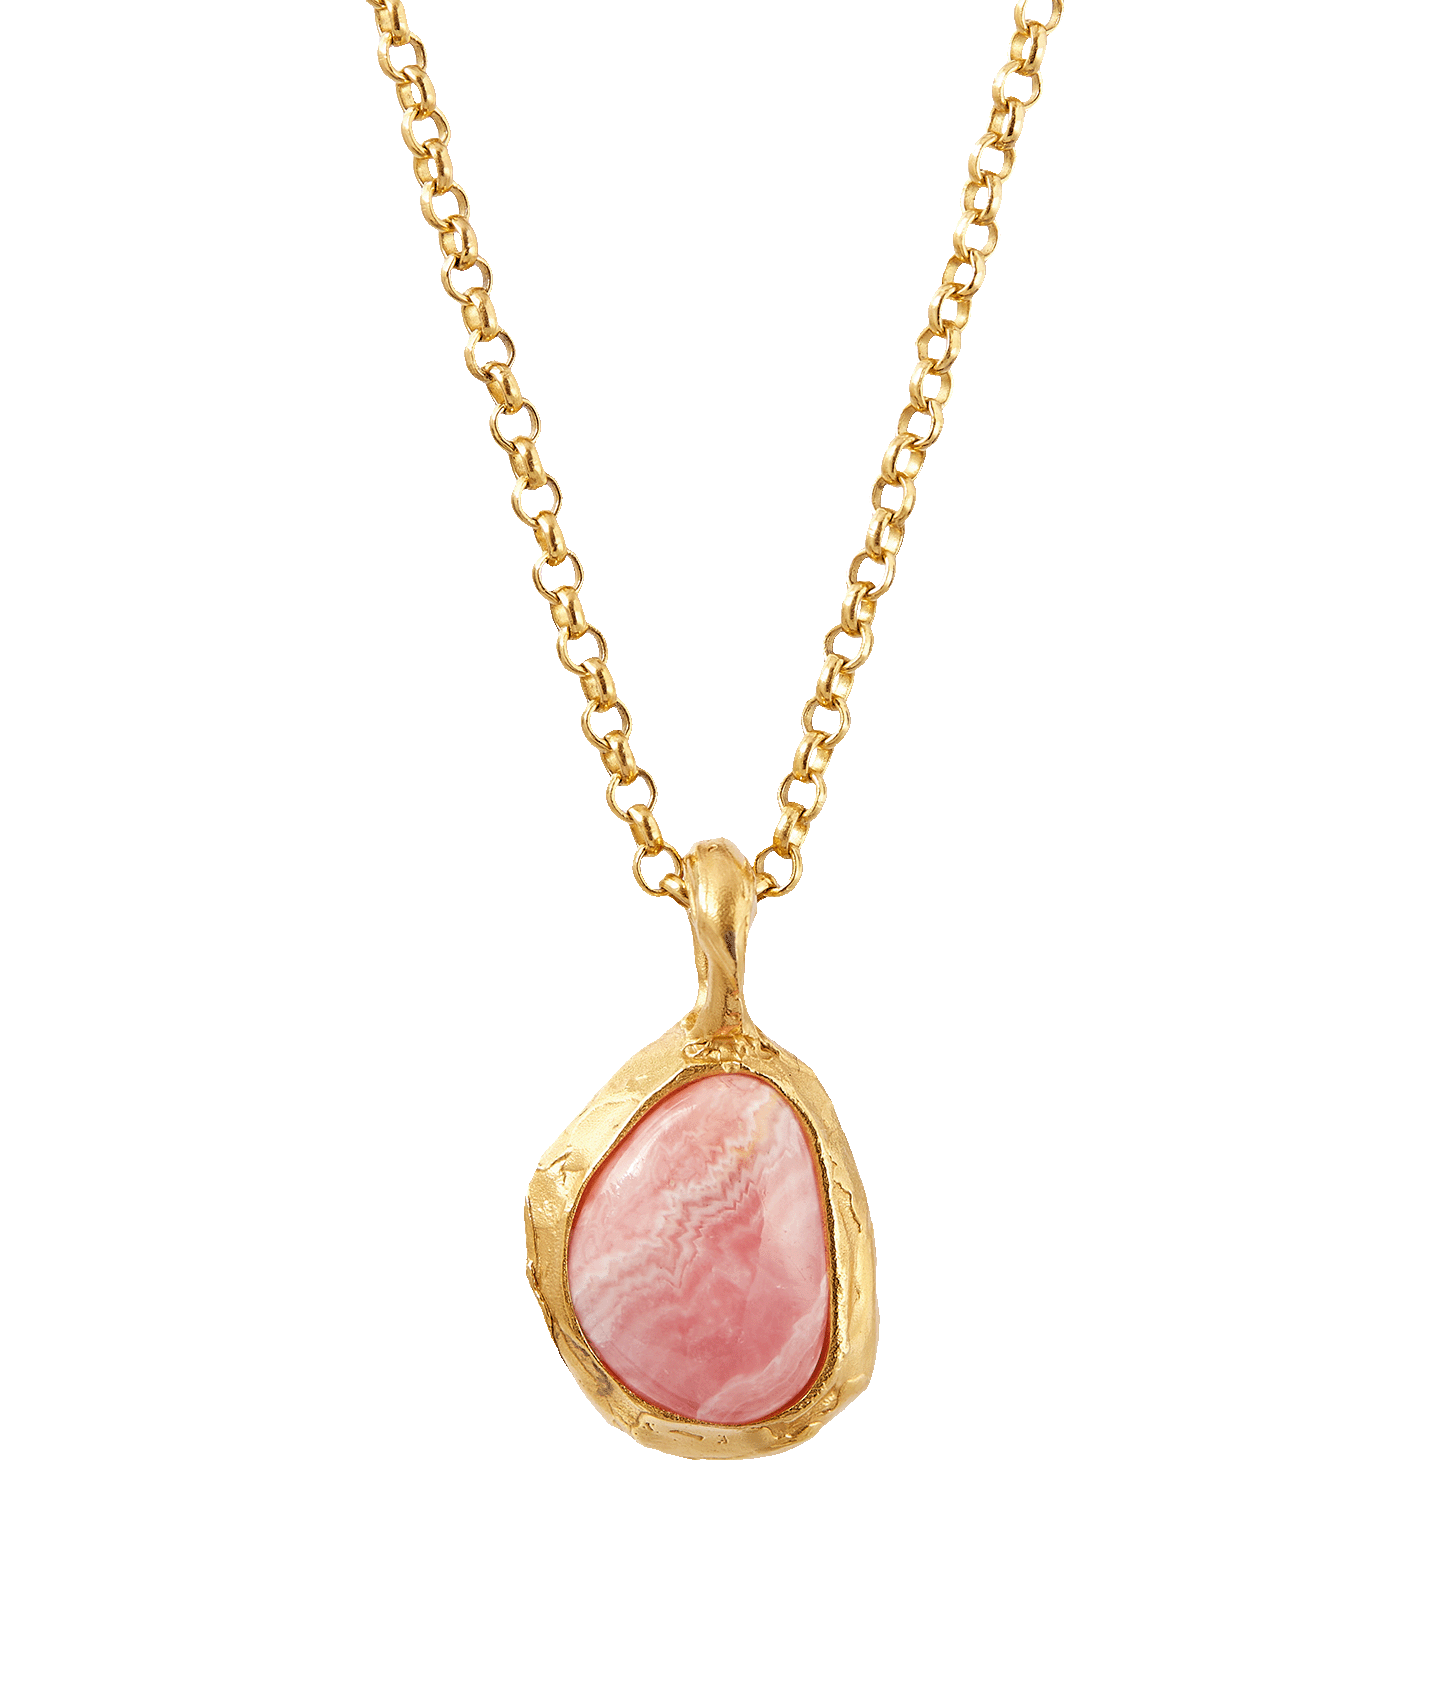 The Droplet of Skies Rhodochrosite Necklace